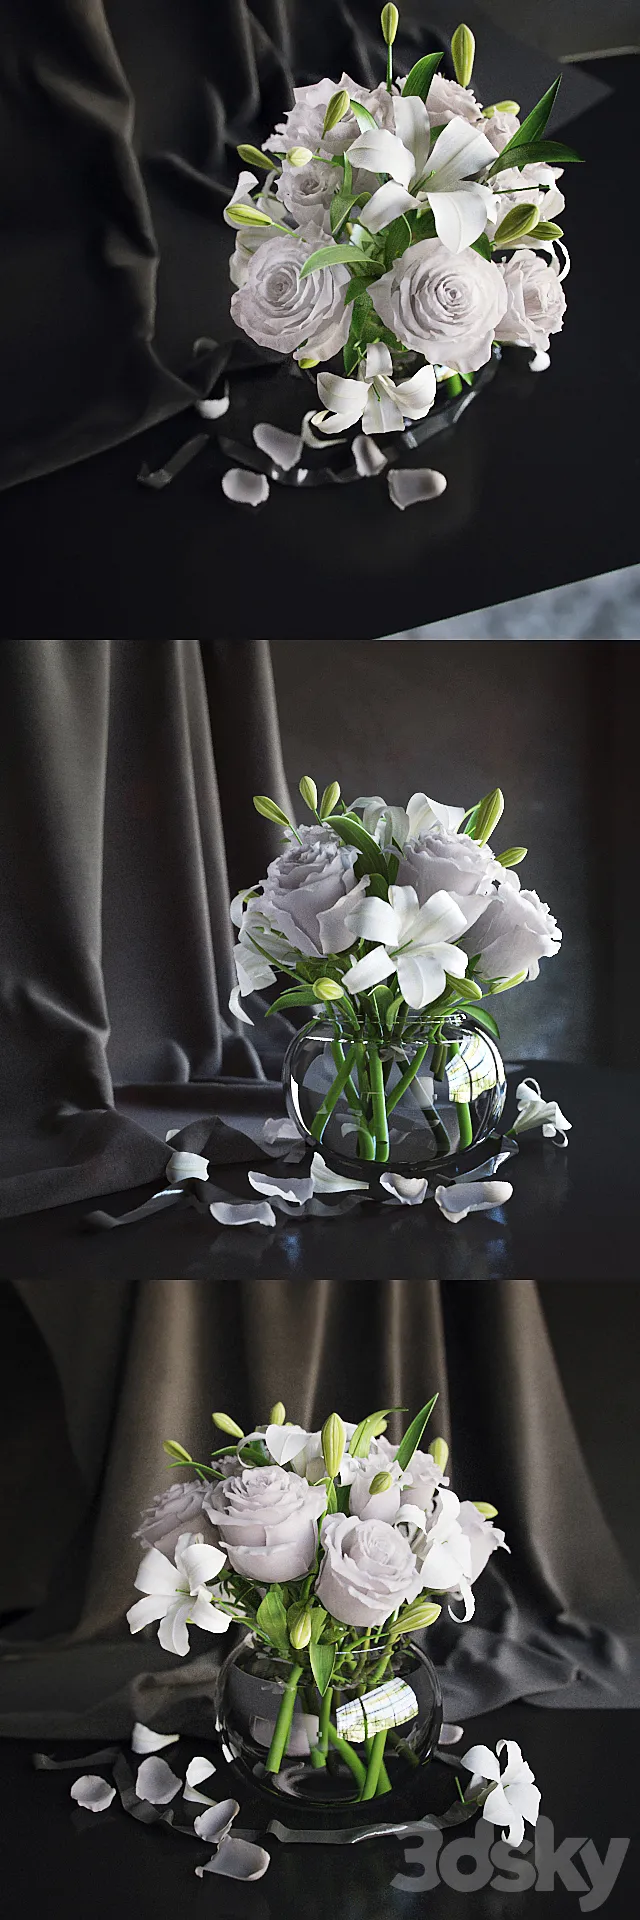 Flowers in a vase 2 3DSMax File